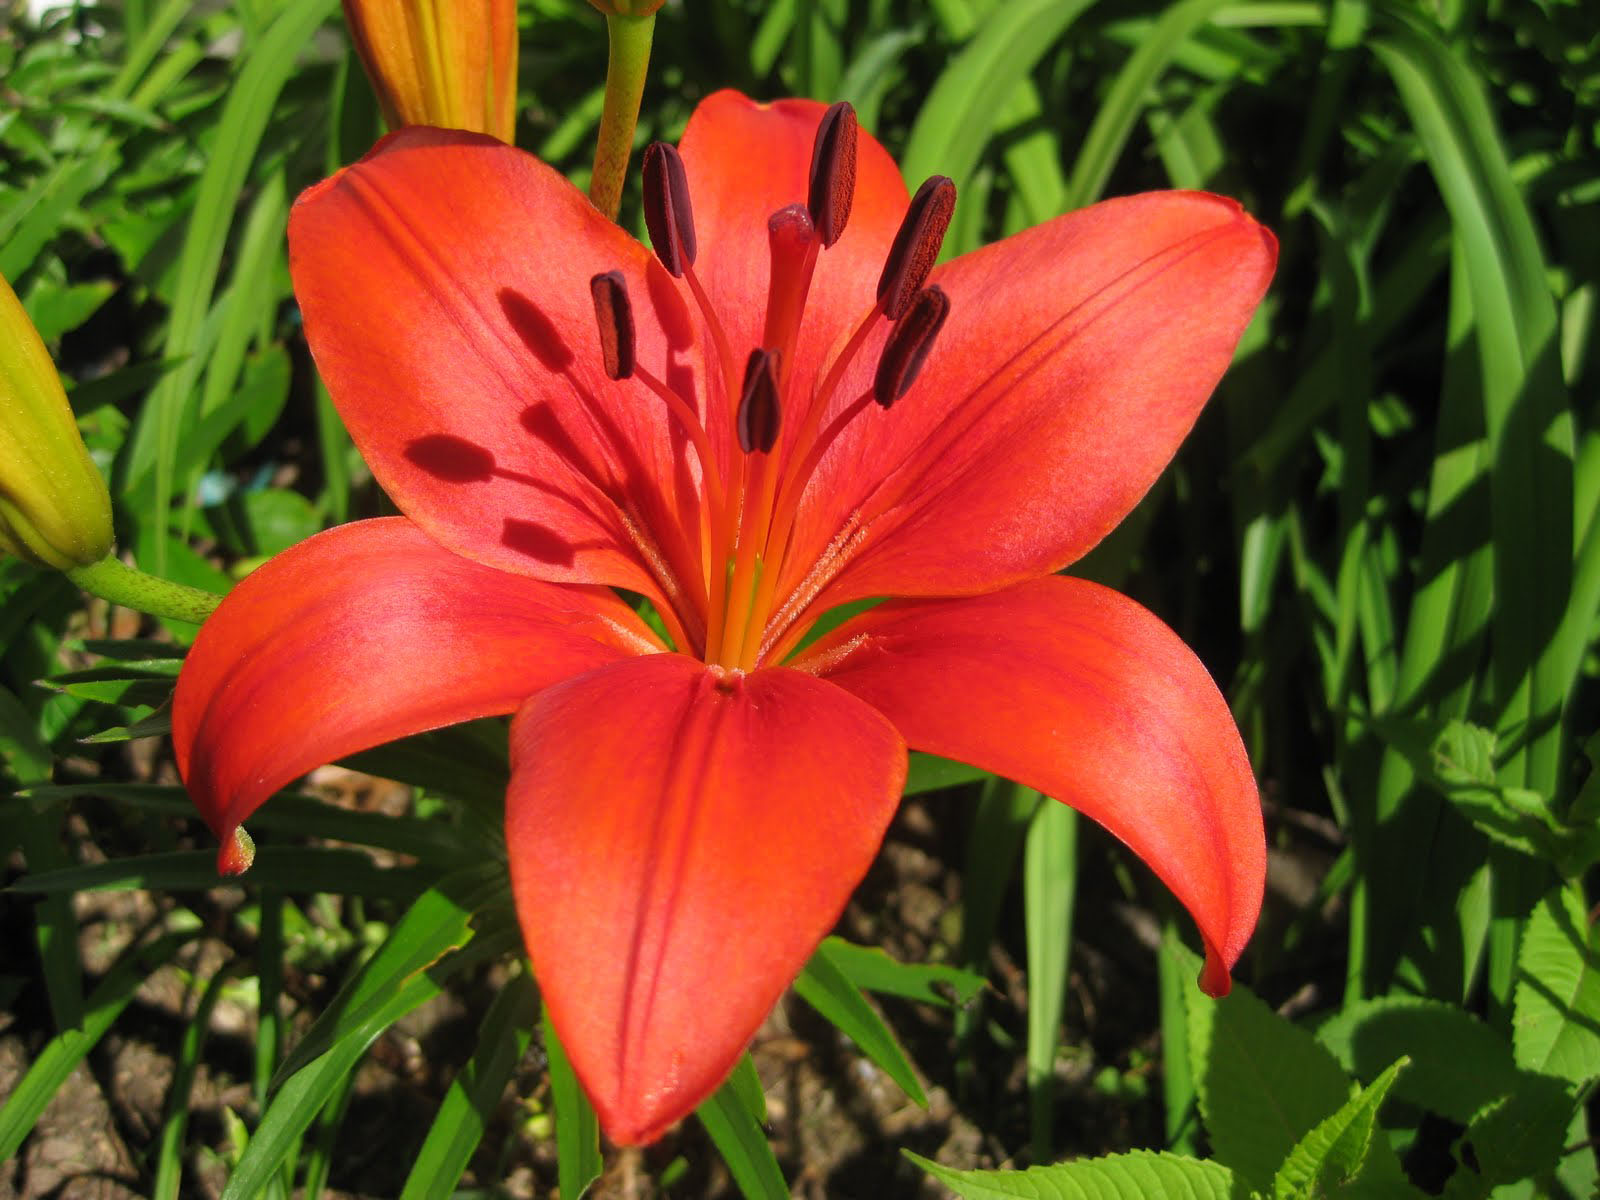 lily flower wallpaper,flower,lily,flowering plant,plant,orange lily